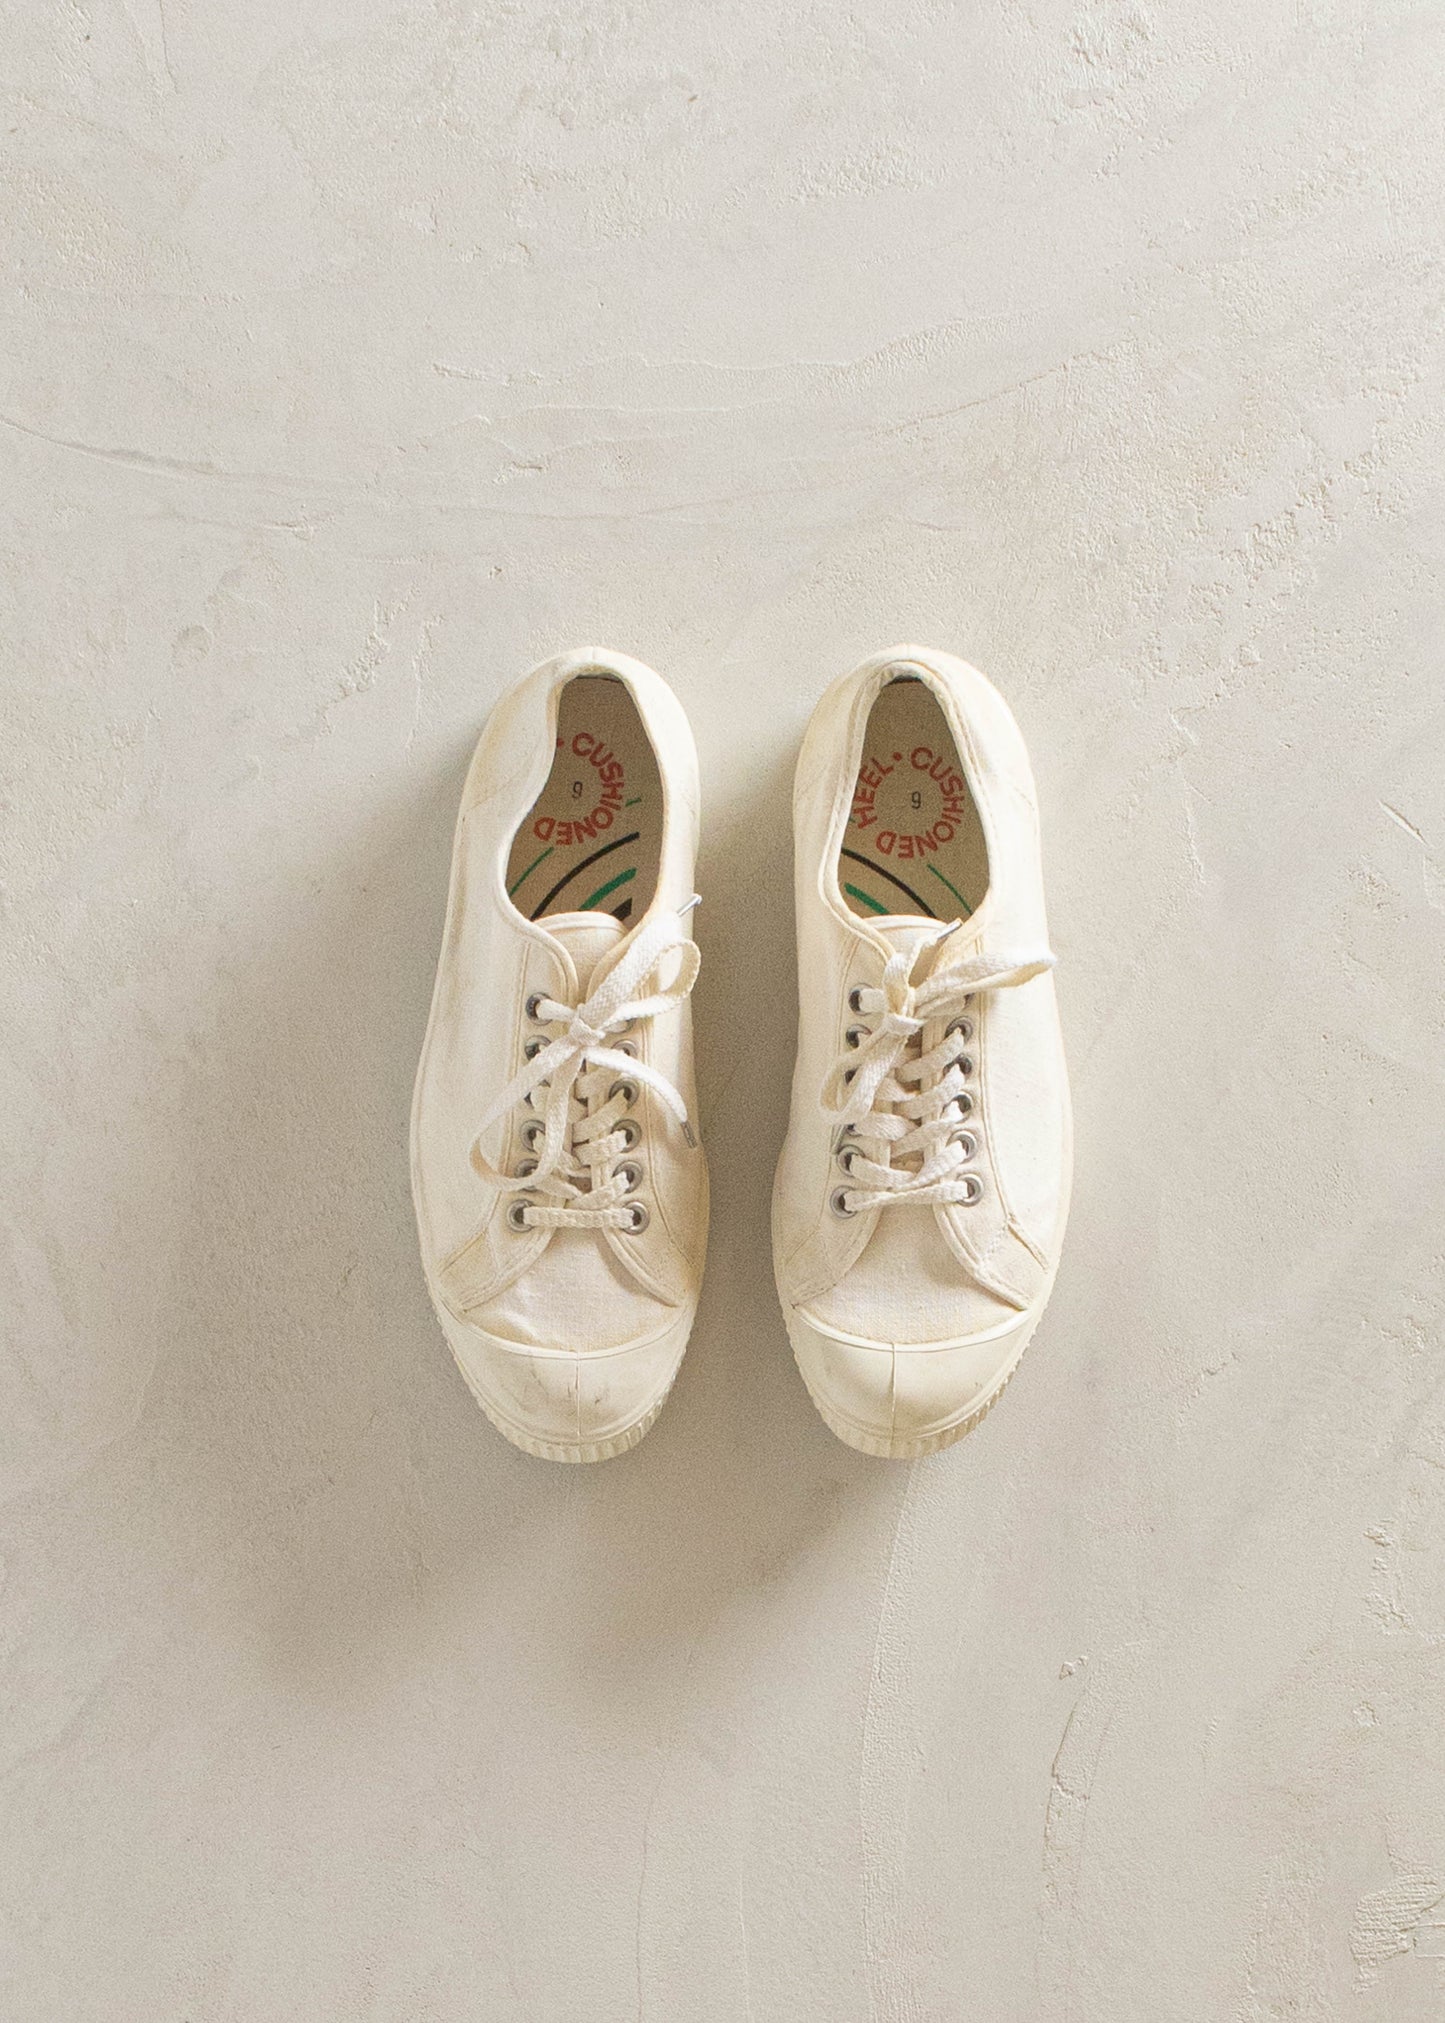 1960s Cebo Sneakers Size 6